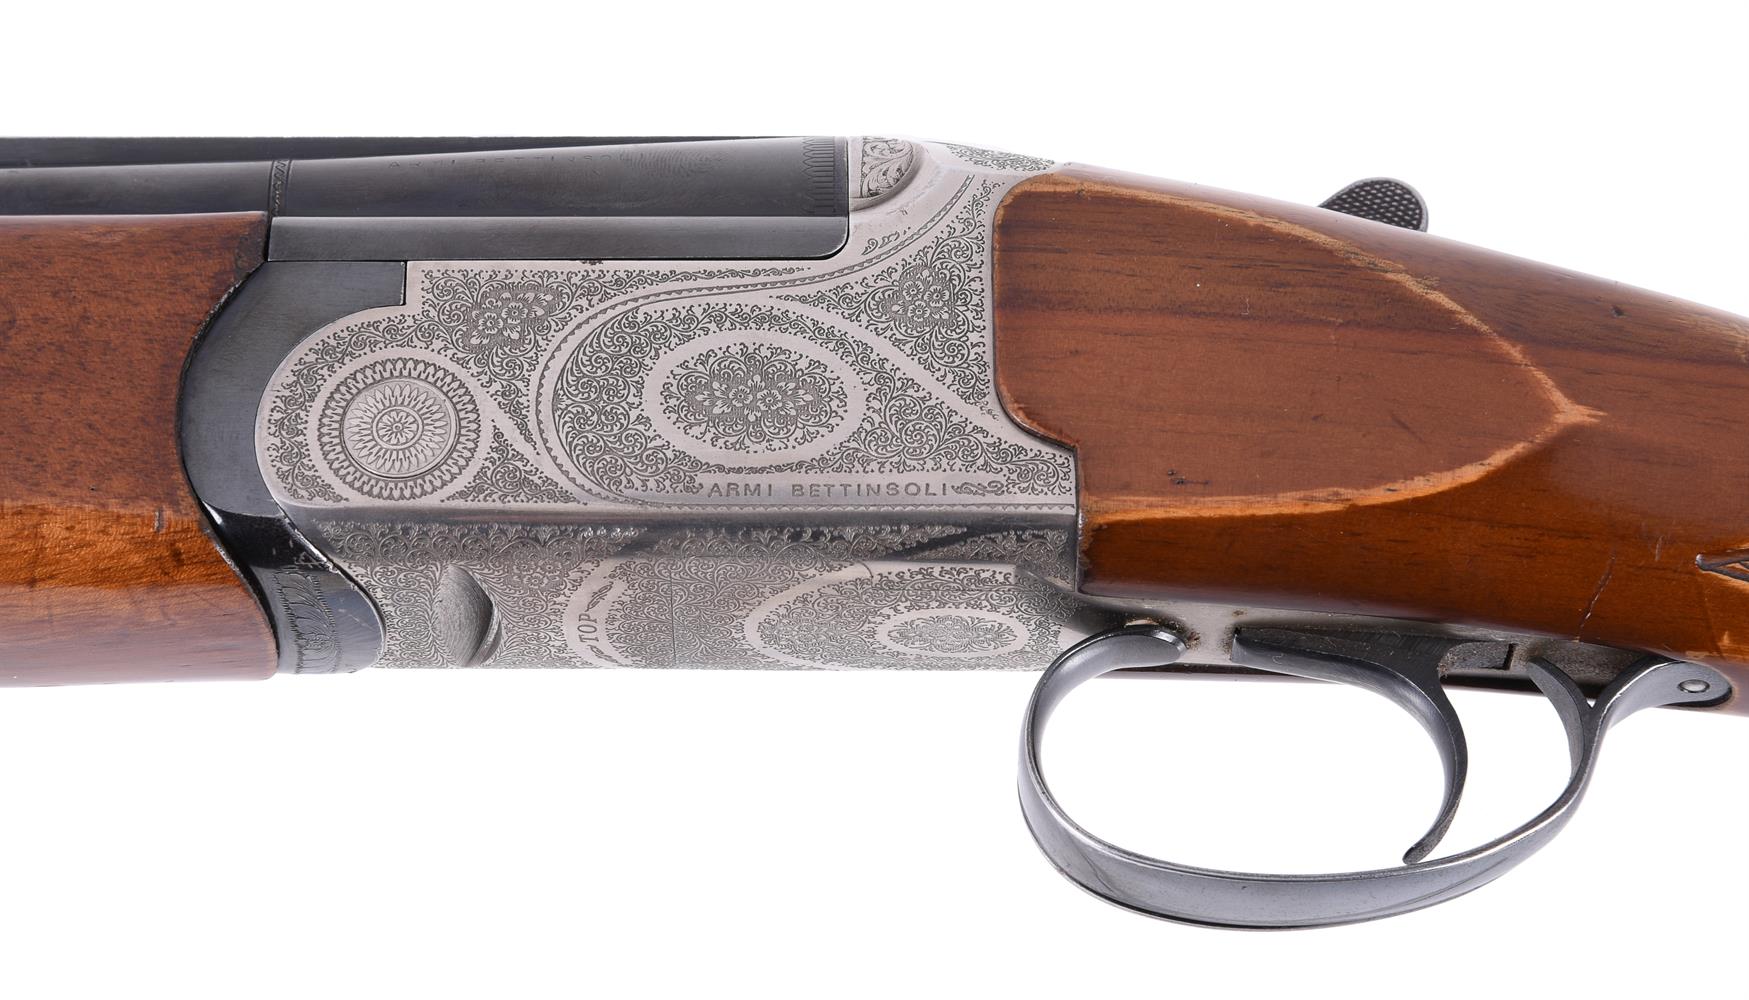 A BETTINSOLI ARMI GARDONE V.T. ITALY 3INCH CHAMBERED OVER AND UNDER 12 BORE WILDFOWLING SHOTGUN - Image 4 of 8